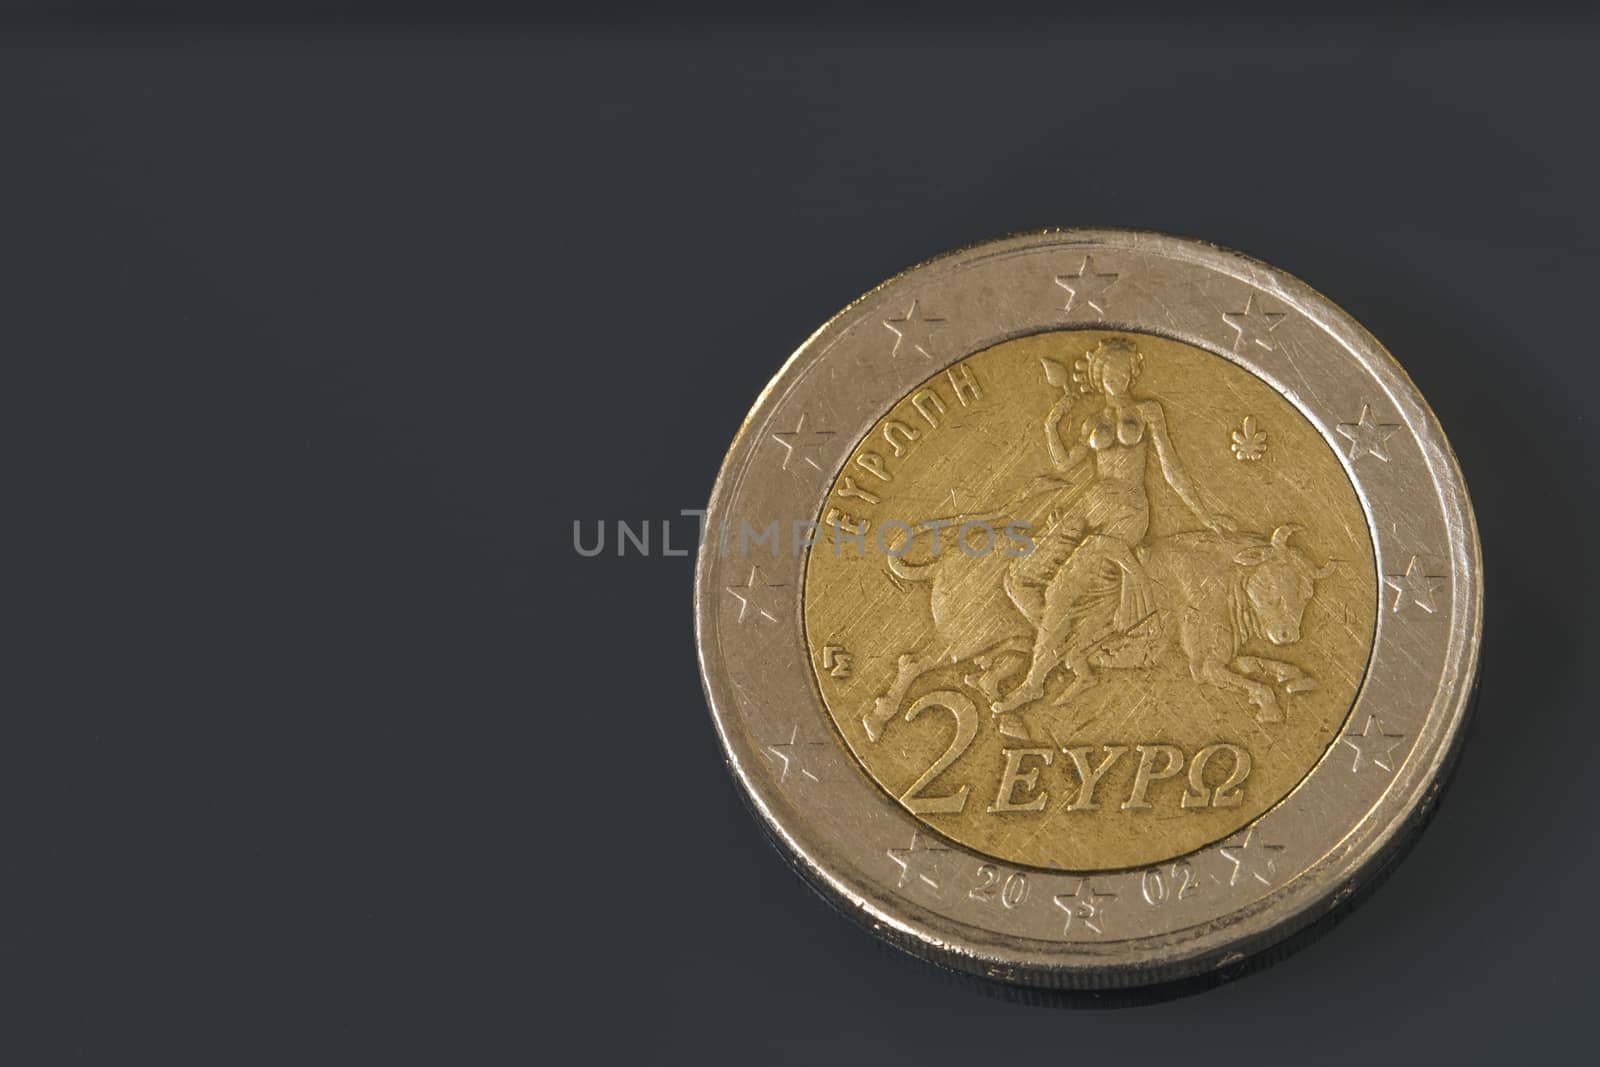 Two, 2 Euro coin from Greece, regular mint by asafaric